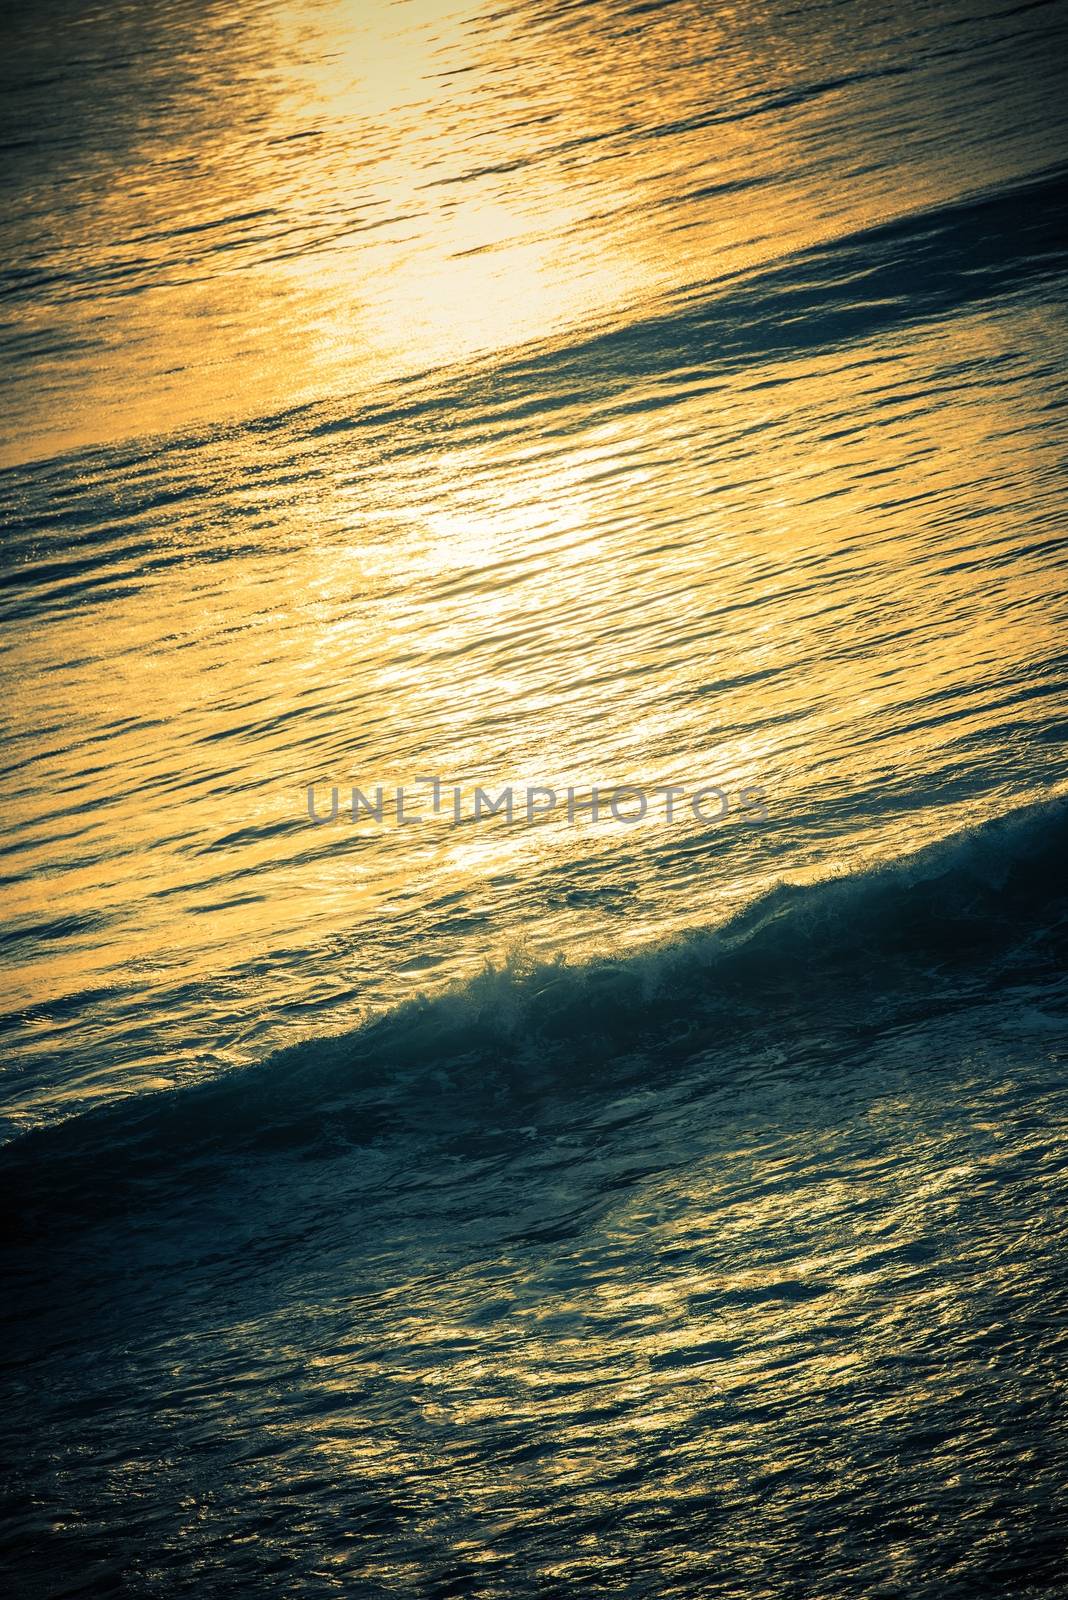 Wavy Ocean Photo Background. Small Waves on the Pacific Ocean Vertical Photography.